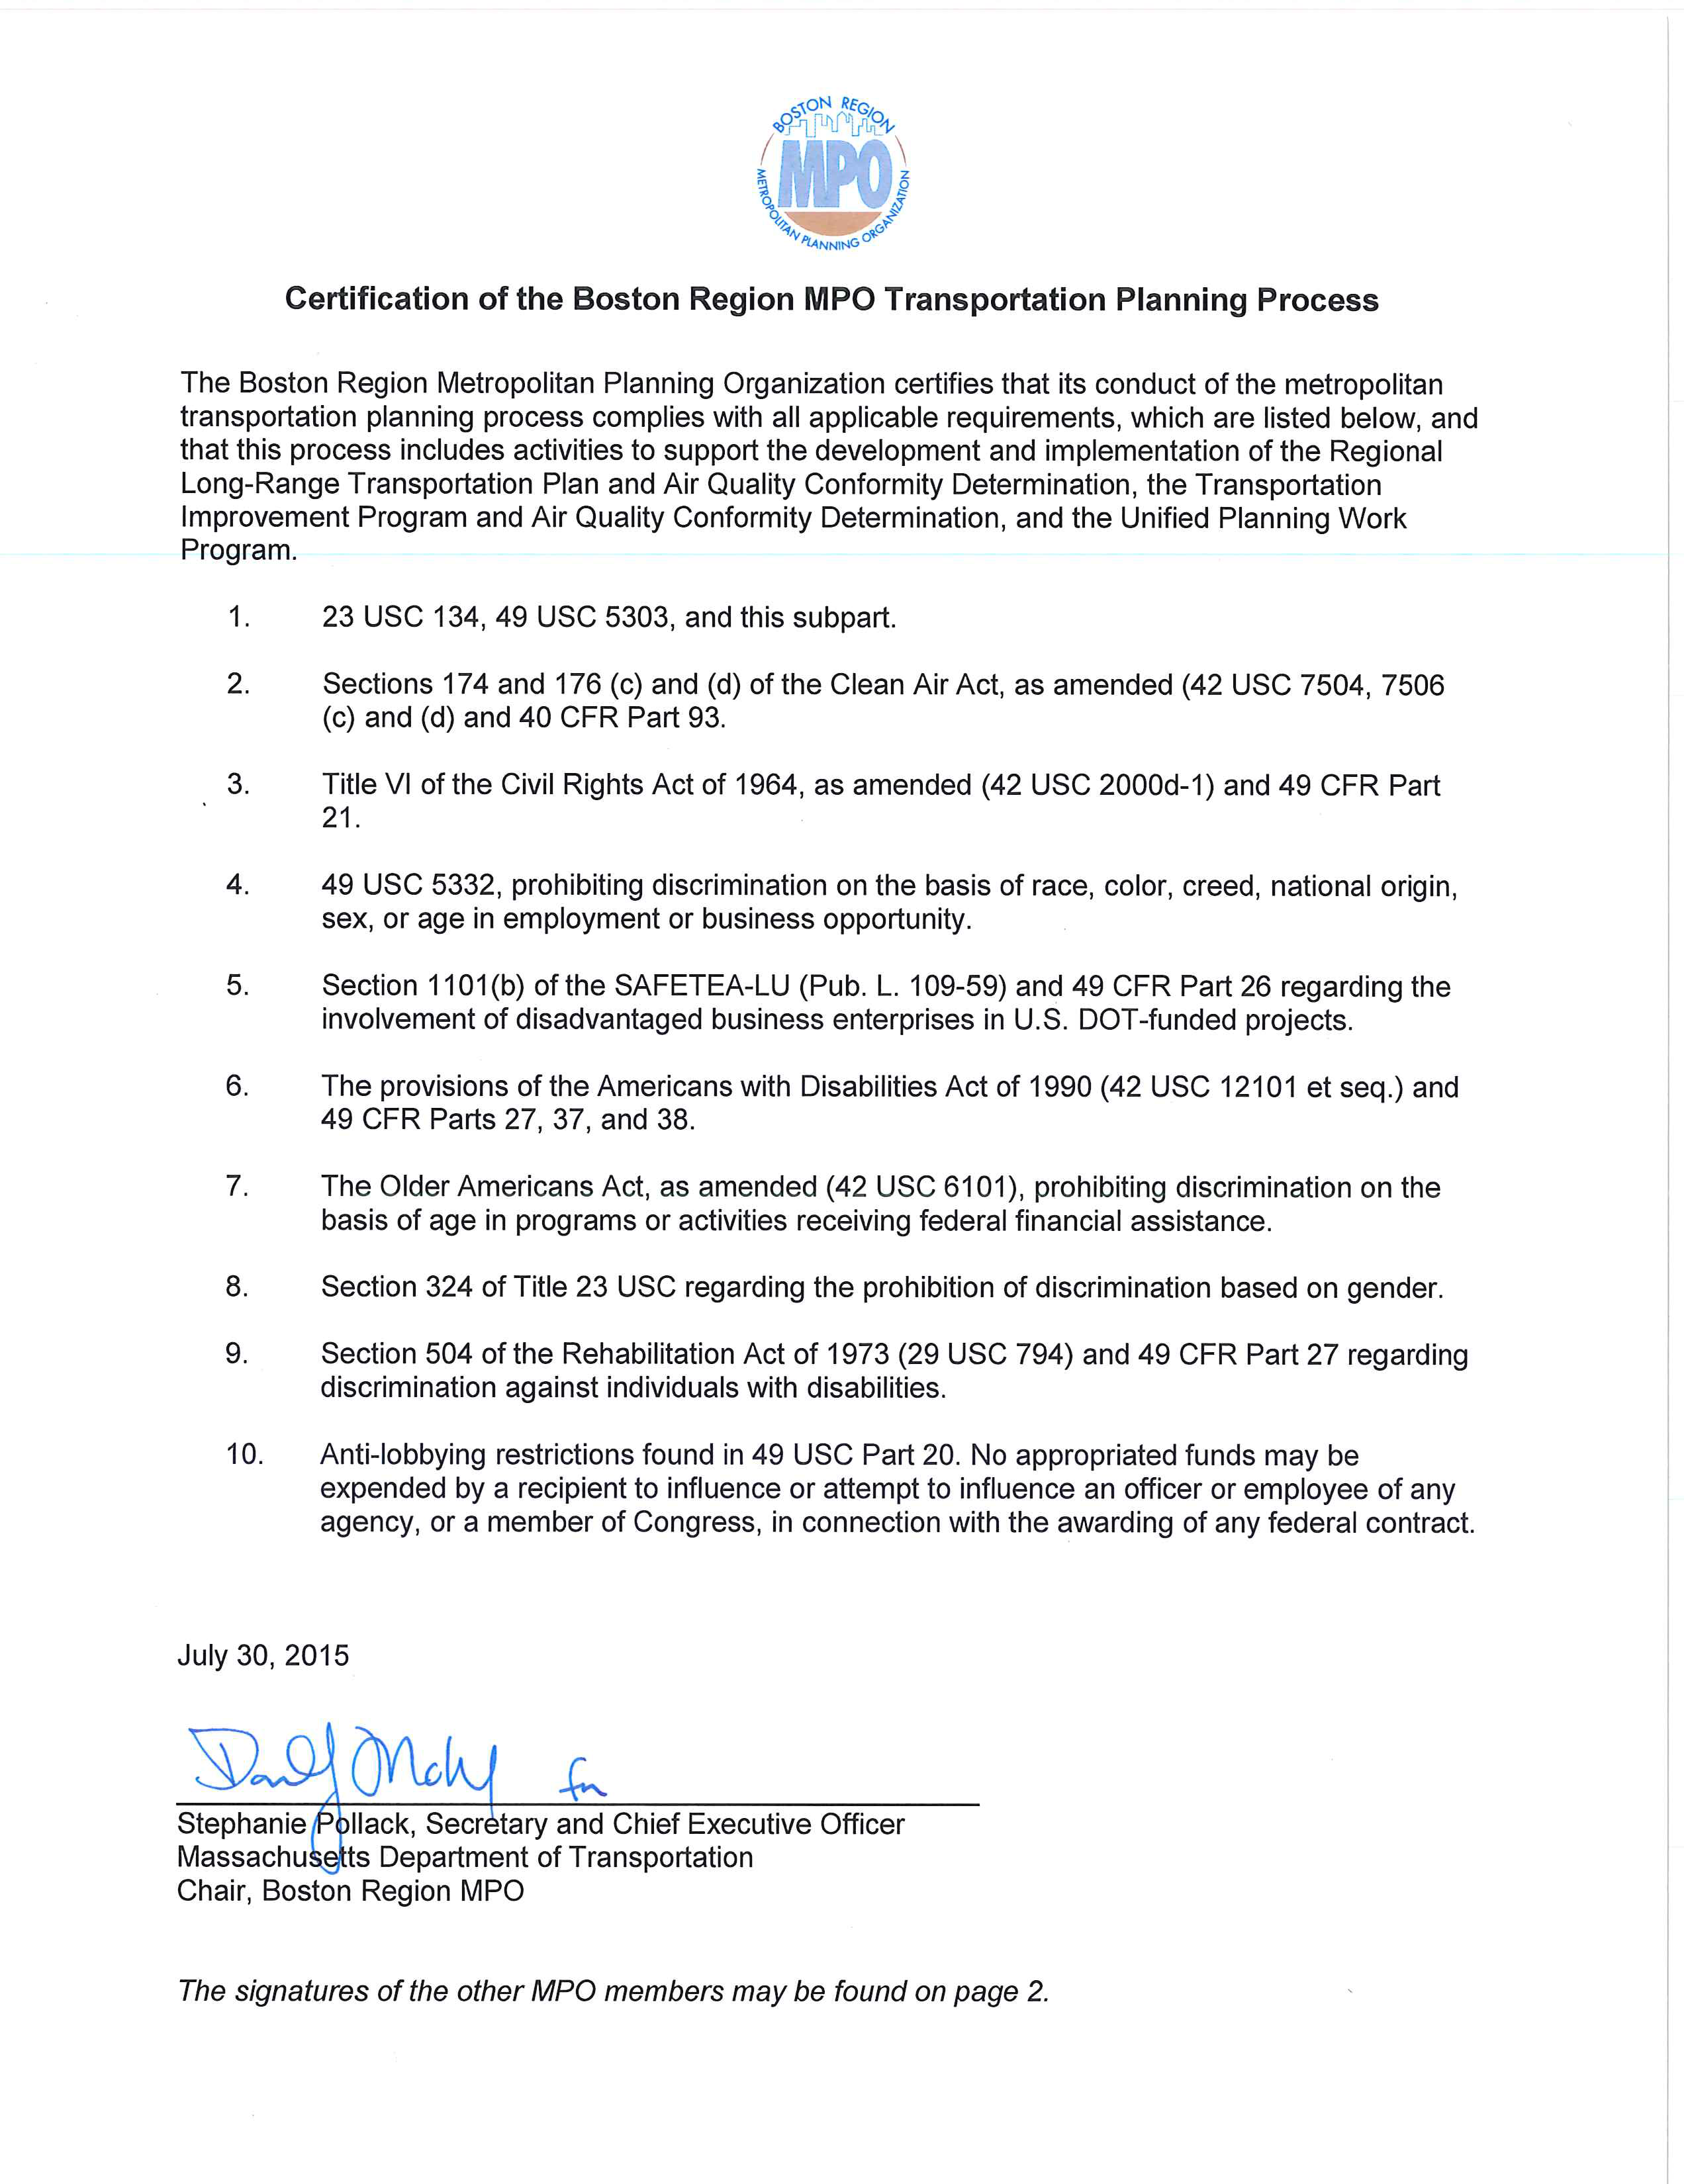 Boston Region MPO Self Certification Statement–July 30, 2015
 
This is the MPO’s self-certification statement regarding the federal requirements for the metropolitan transportation planning process. It has been signed by MPO members (except for the South Shore Coalition and Massport representatives).
